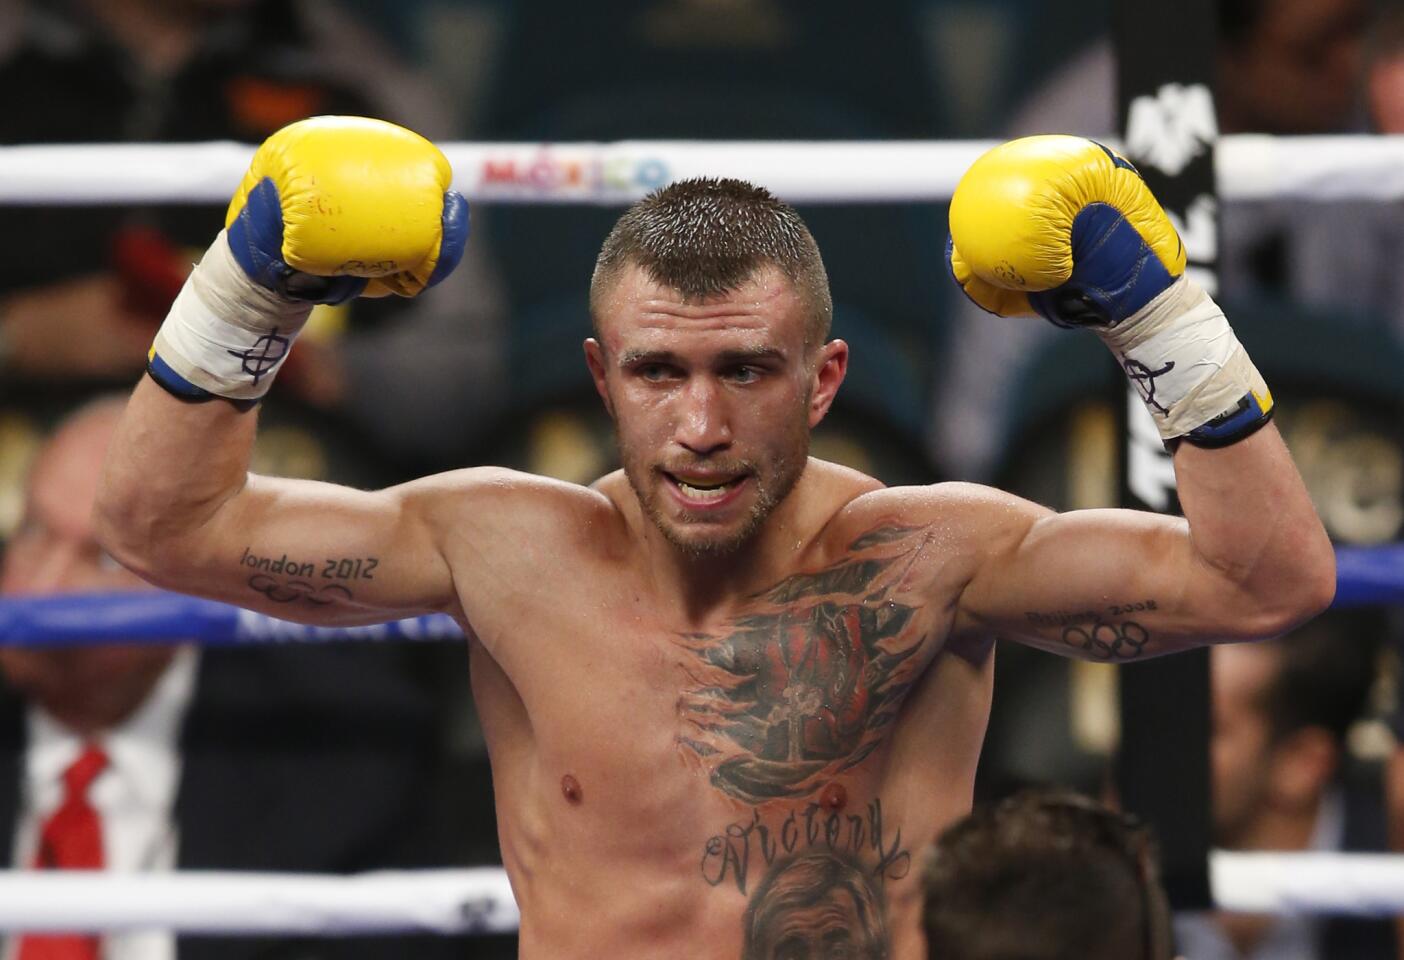 Vasyl Lomachenko celebrates his ninth-round knockout victory over Gamalier Rodriguez in their featherweight title fight at the MGM Grand Garden Arena.